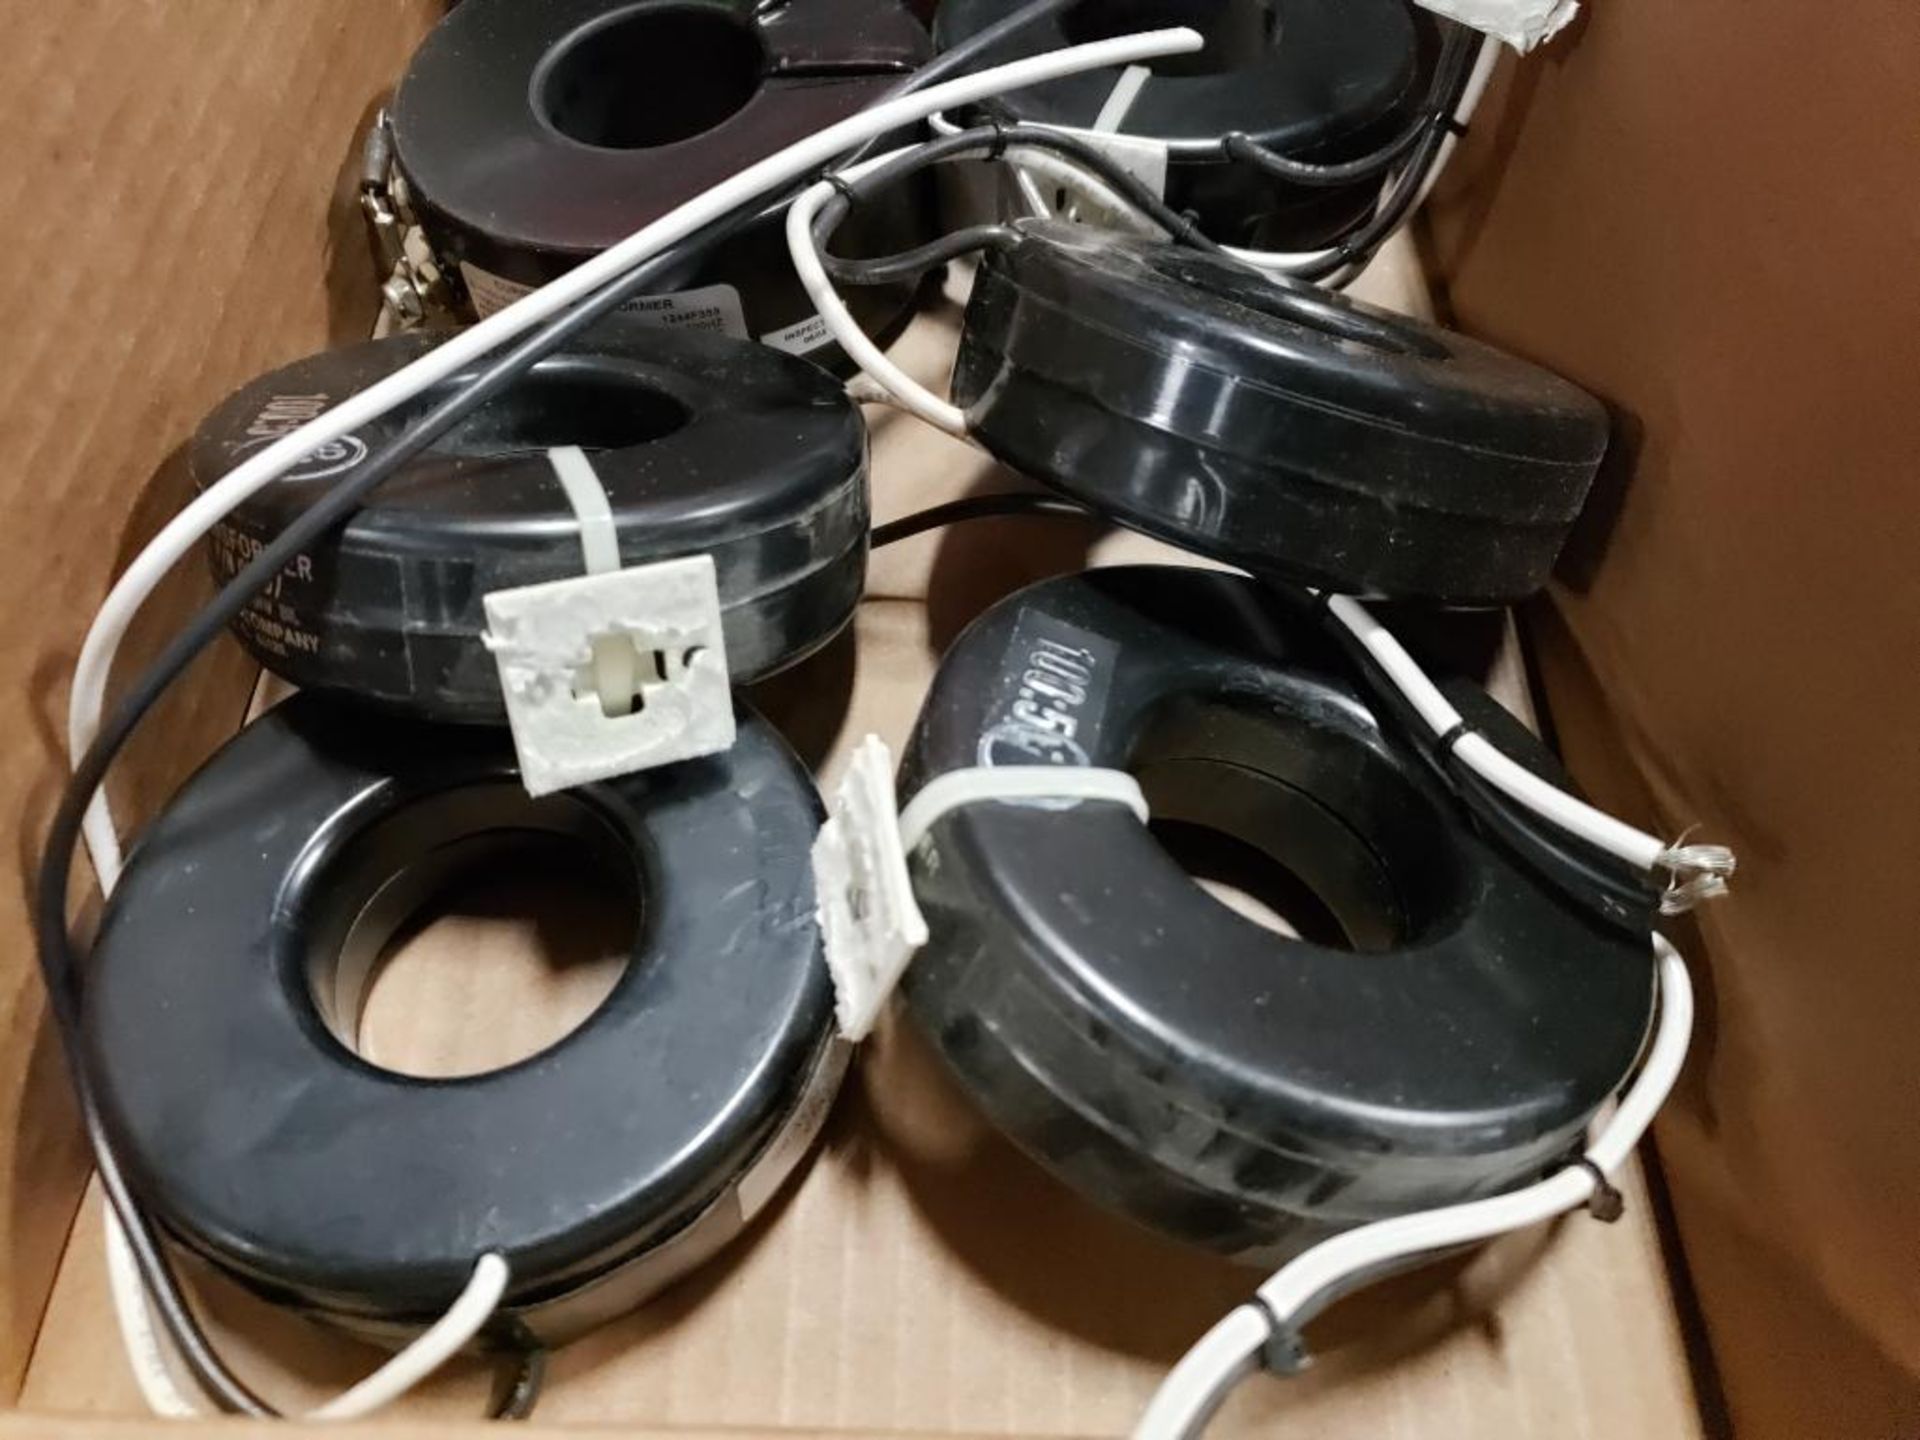 Qty 6 - Assorted current transformer. Simpson, WICC LTD. - Image 2 of 5